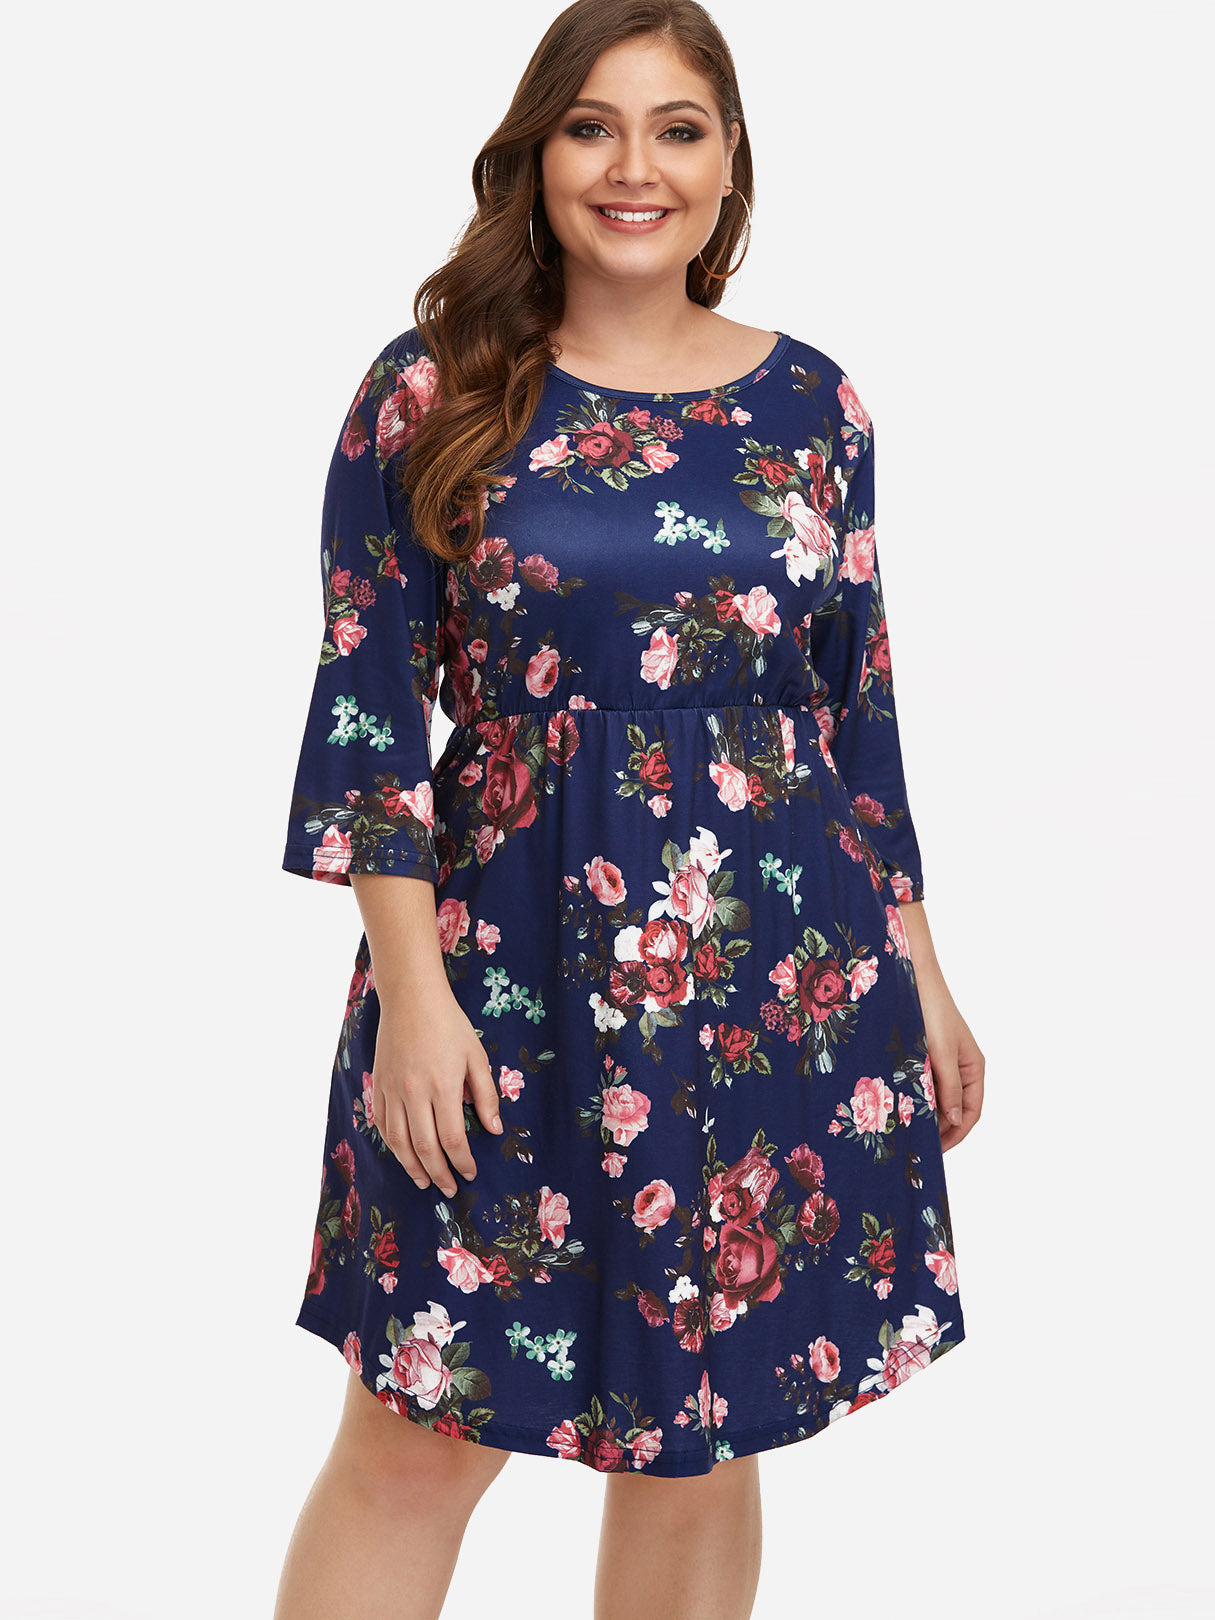 Custom Plus Size Dresses For Young Women